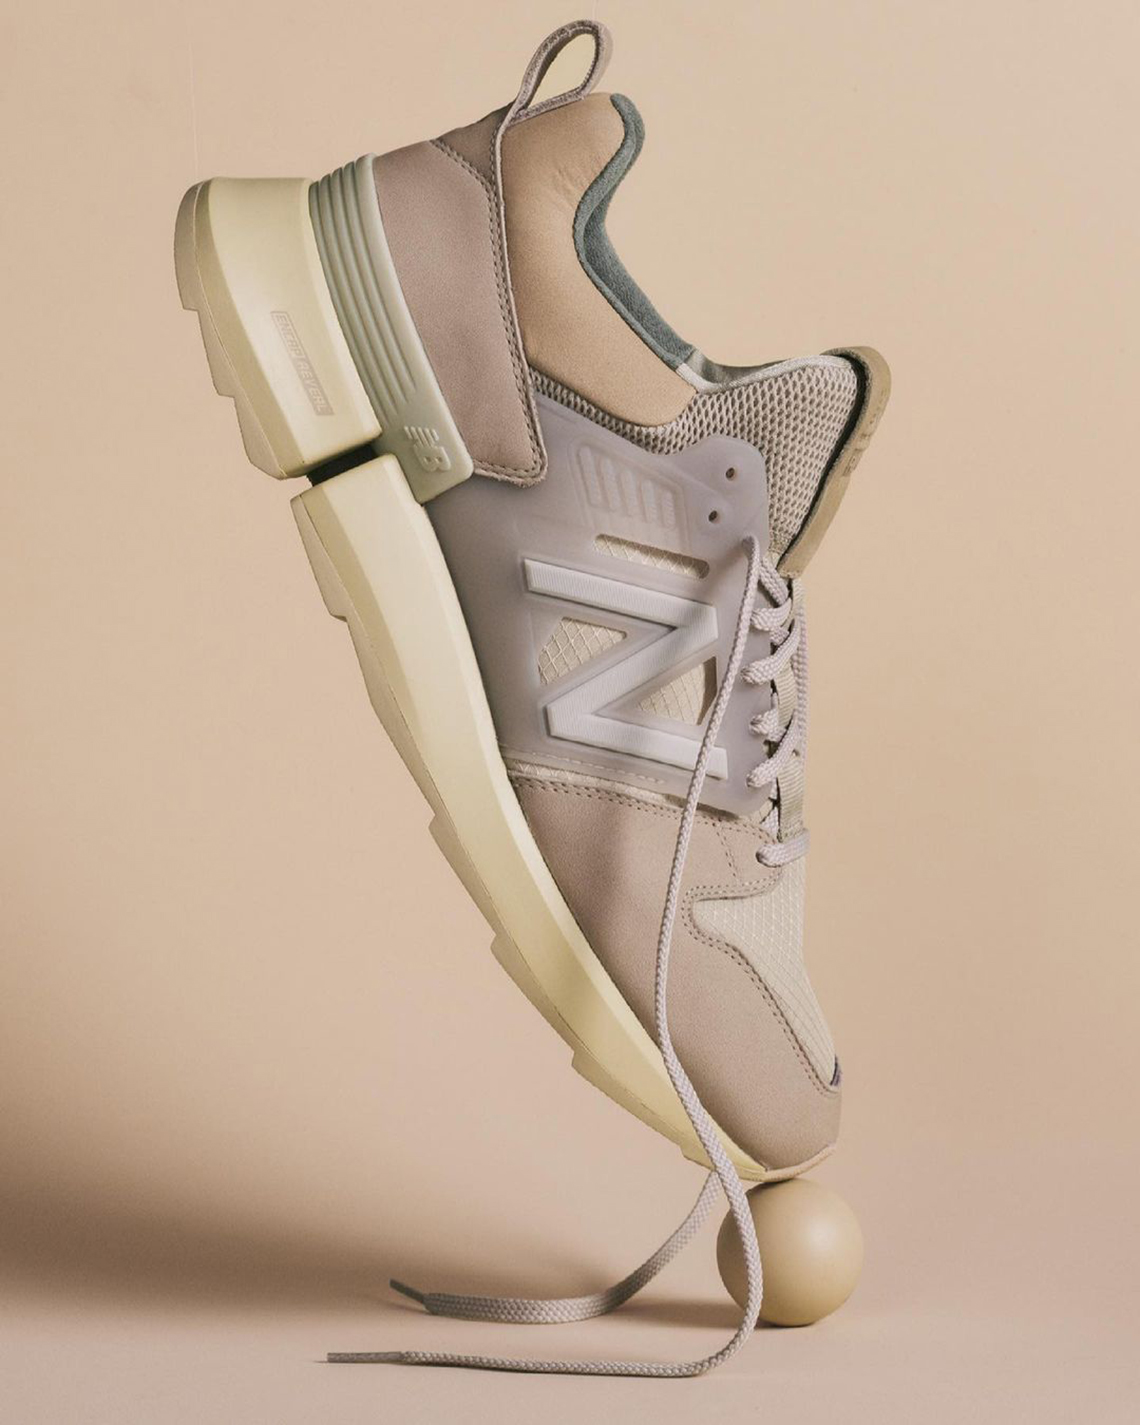 AURALEE And New Balance Give The R_C2 An Elegant, Tonal Update